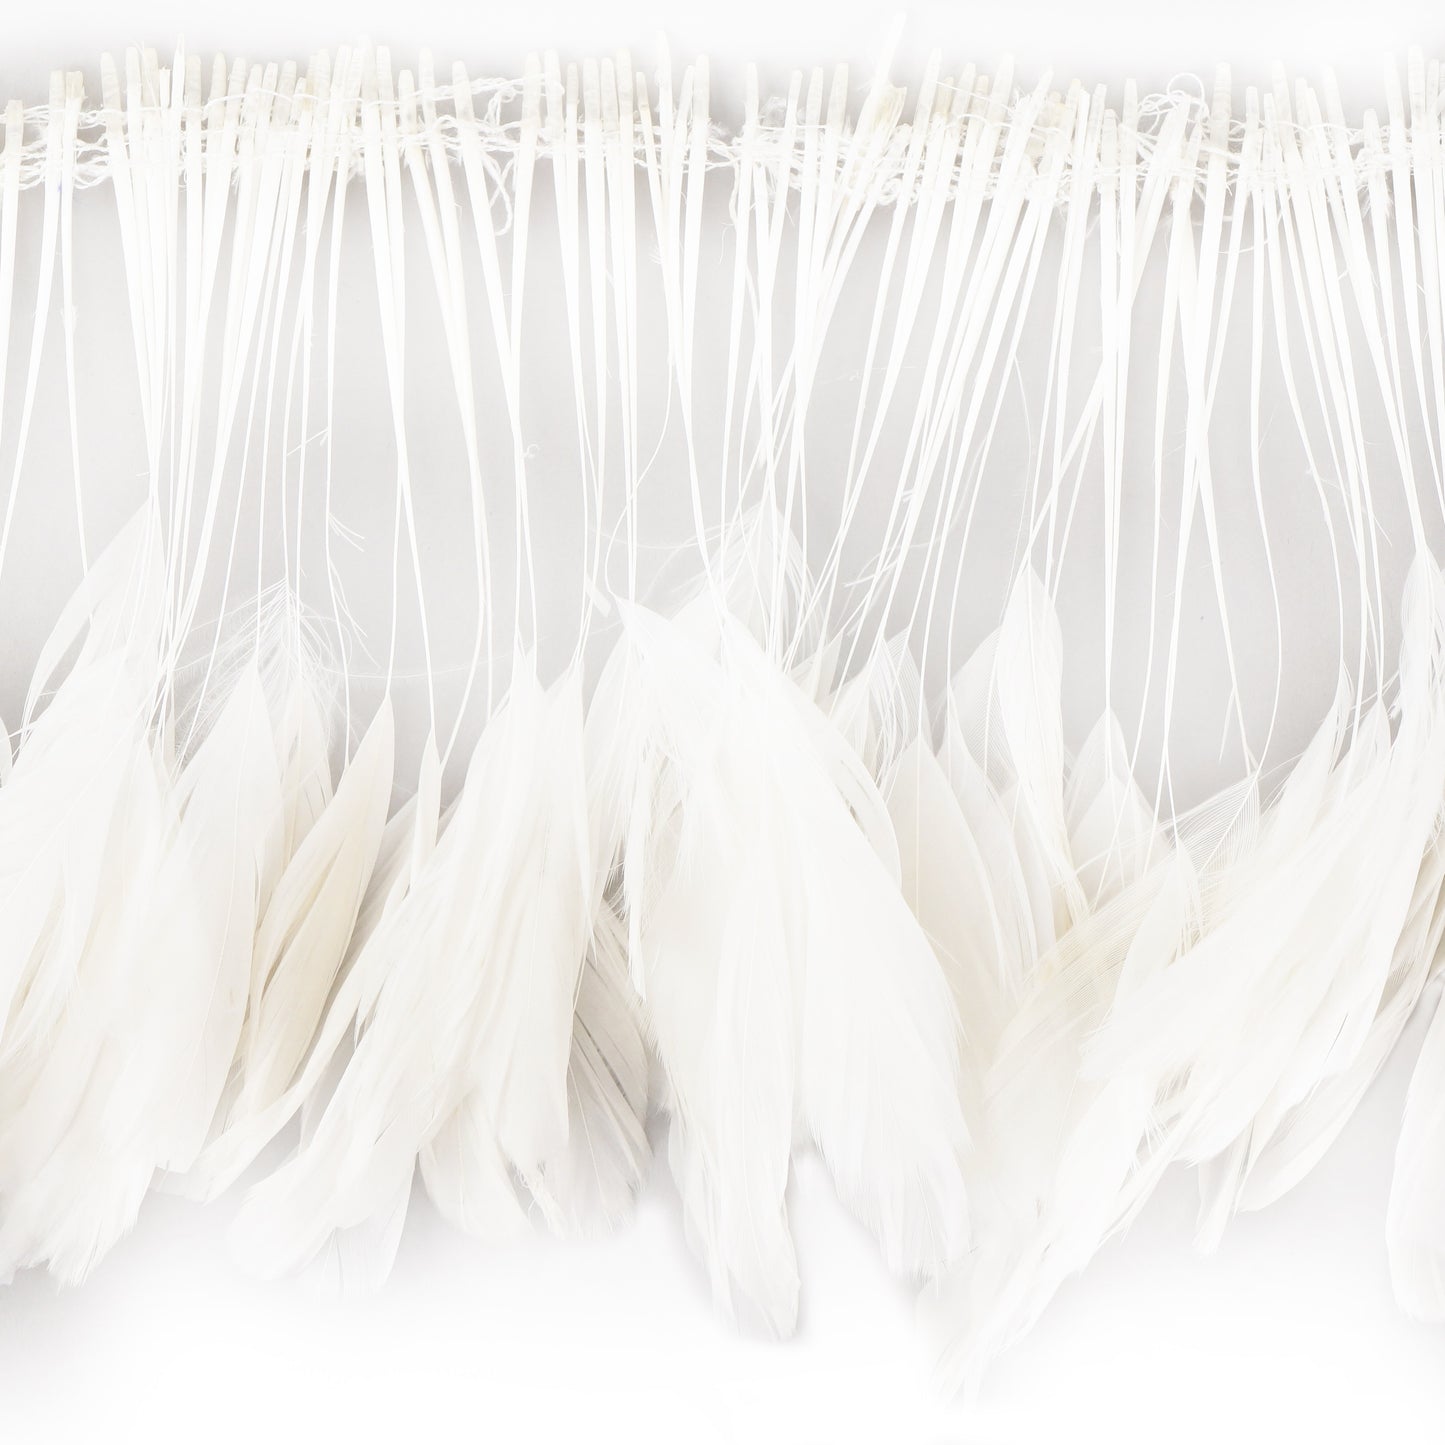 Stripped Rooster Coque Tails Feathers Bleach White 4-6” Strung [1 yard]